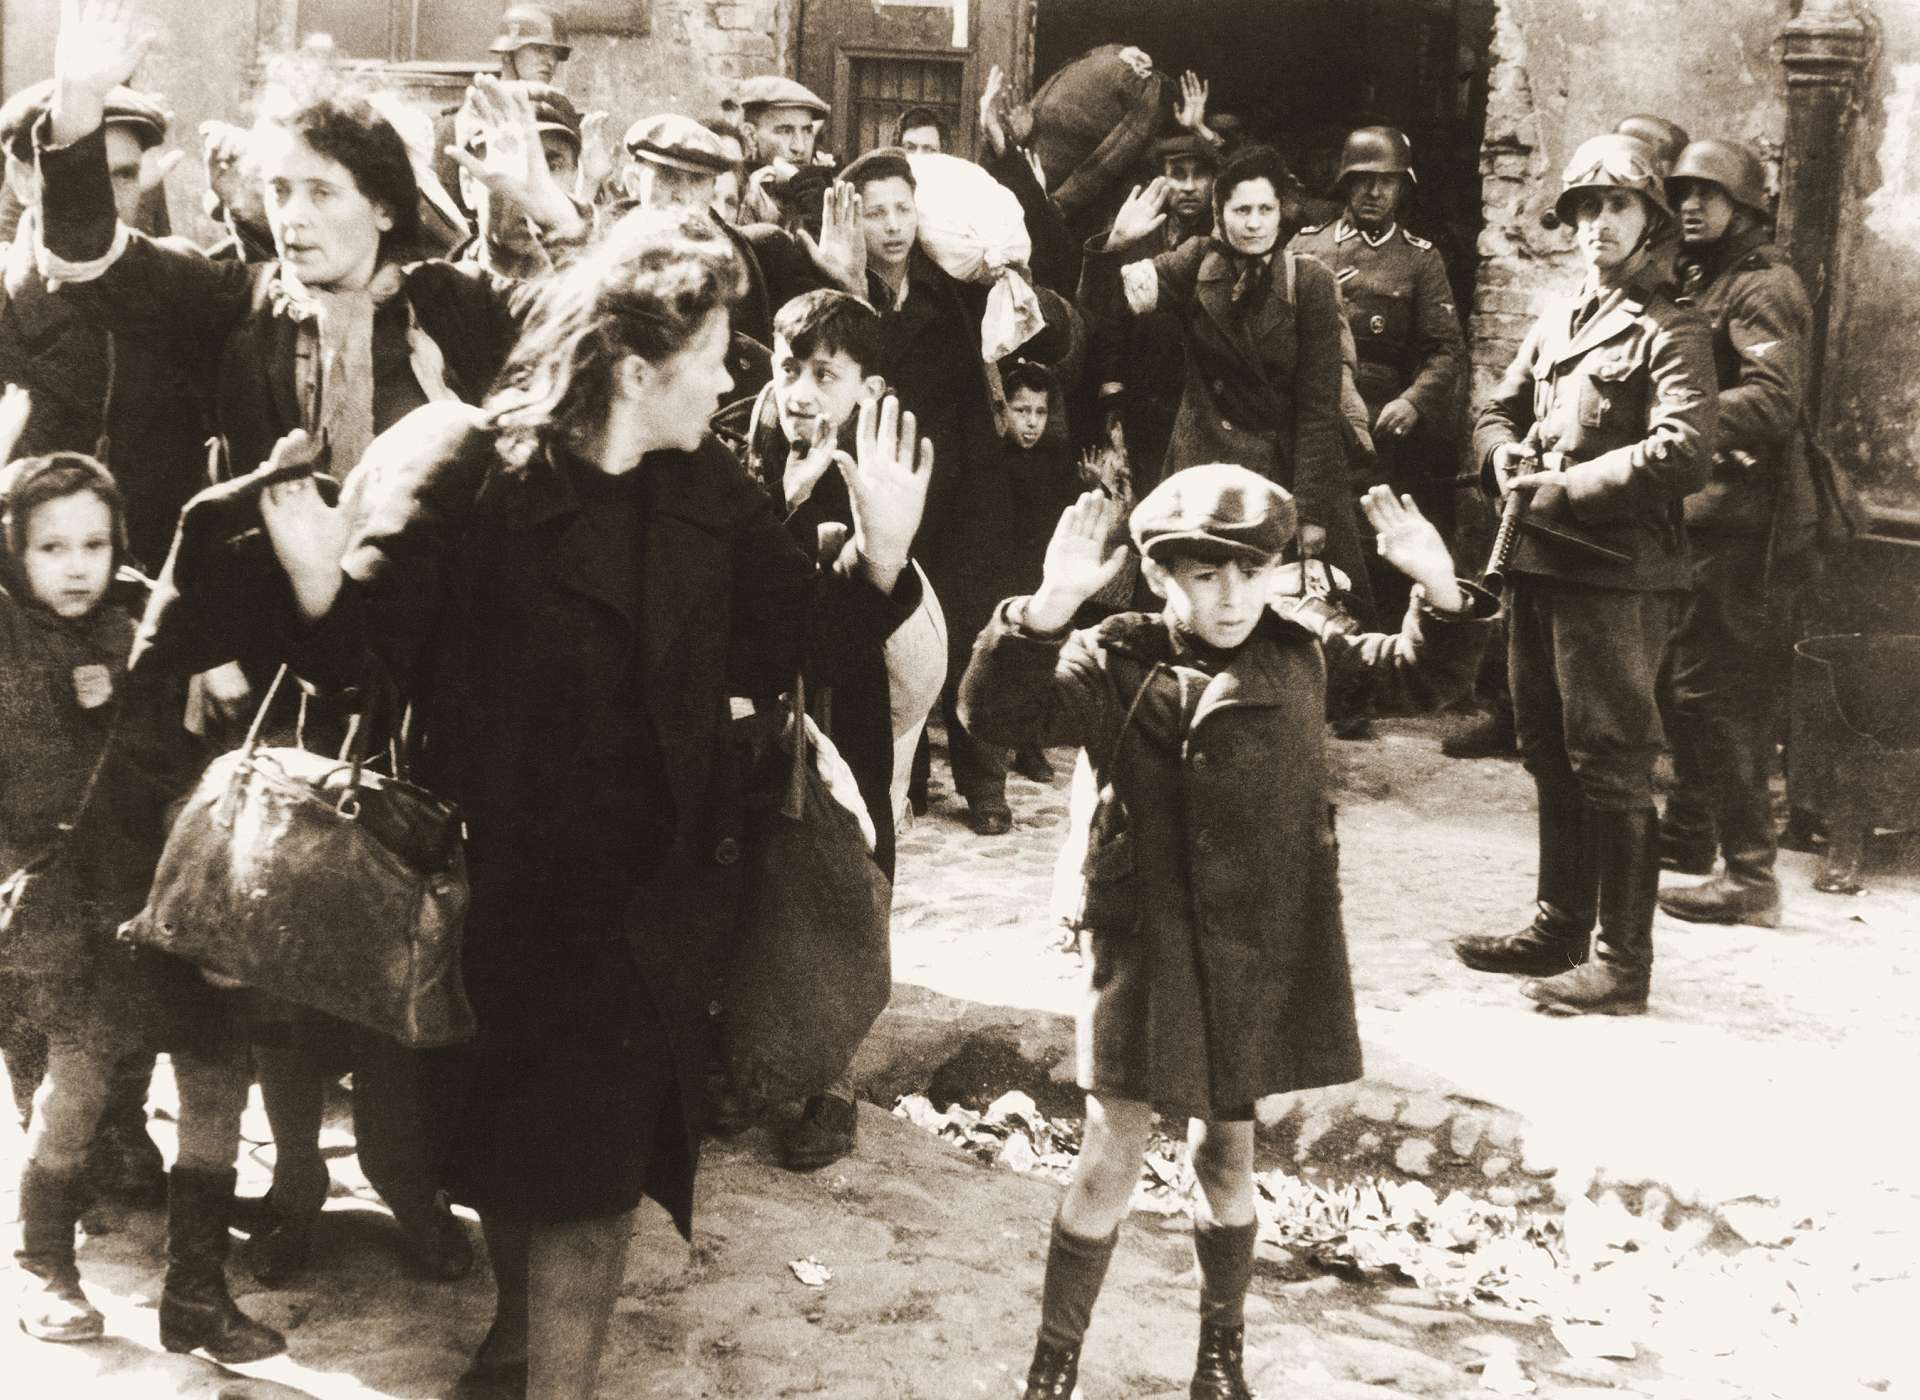 Nazi soldiers round up Jews for arrest during Warsaw Ghetto Uprising.